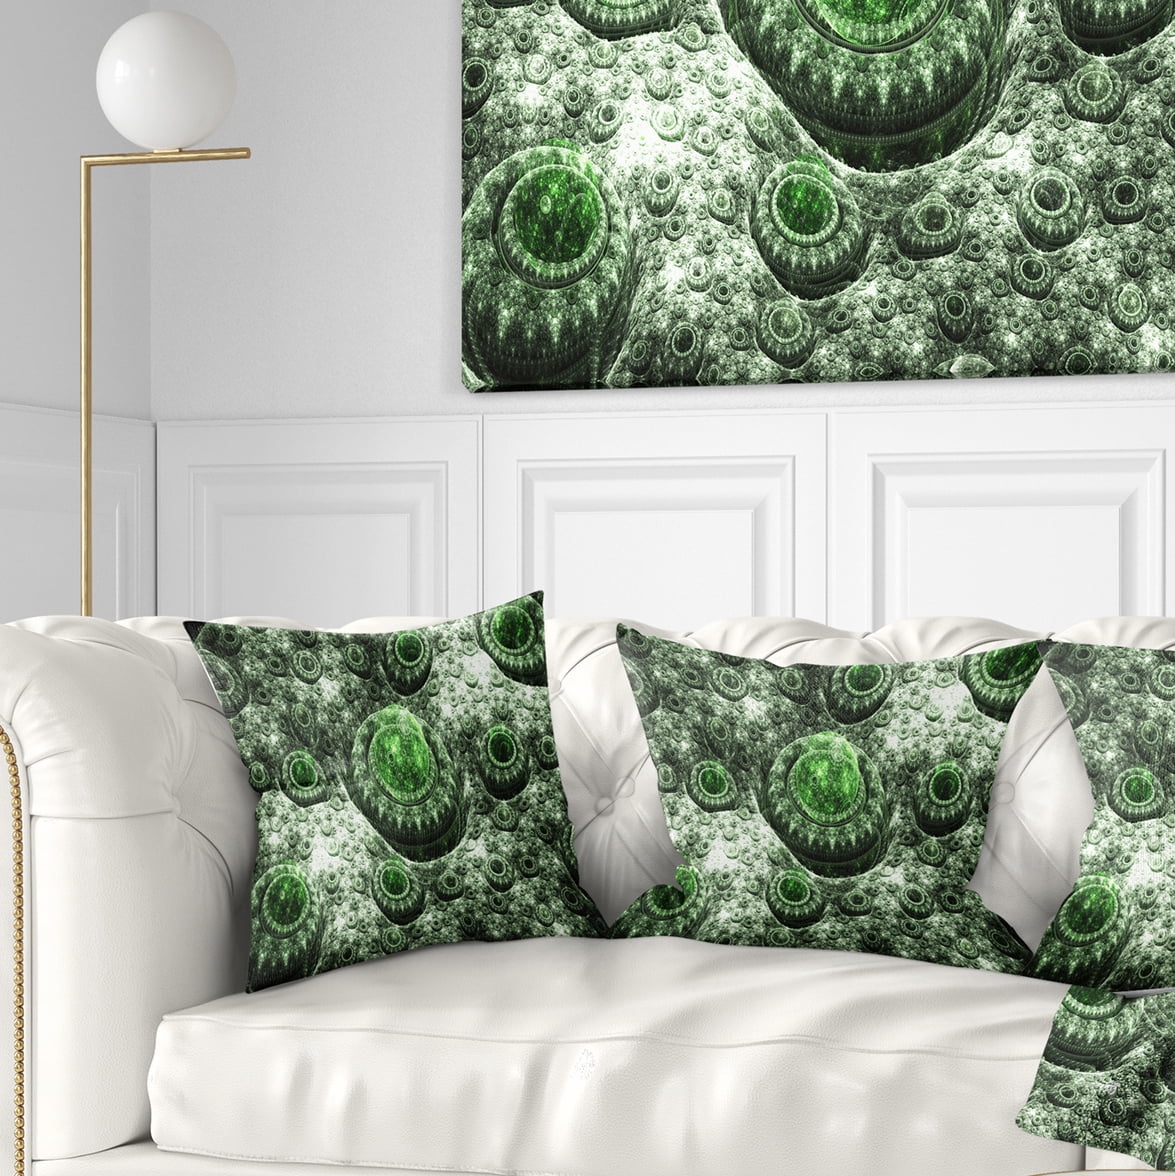 x 18 in Designart CU16507-18-18 Exotic Green Fractal Landscape Abstract Cushion Cover for Living Room in Sofa Throw Pillow 18 in Insert Printed On Both Side 